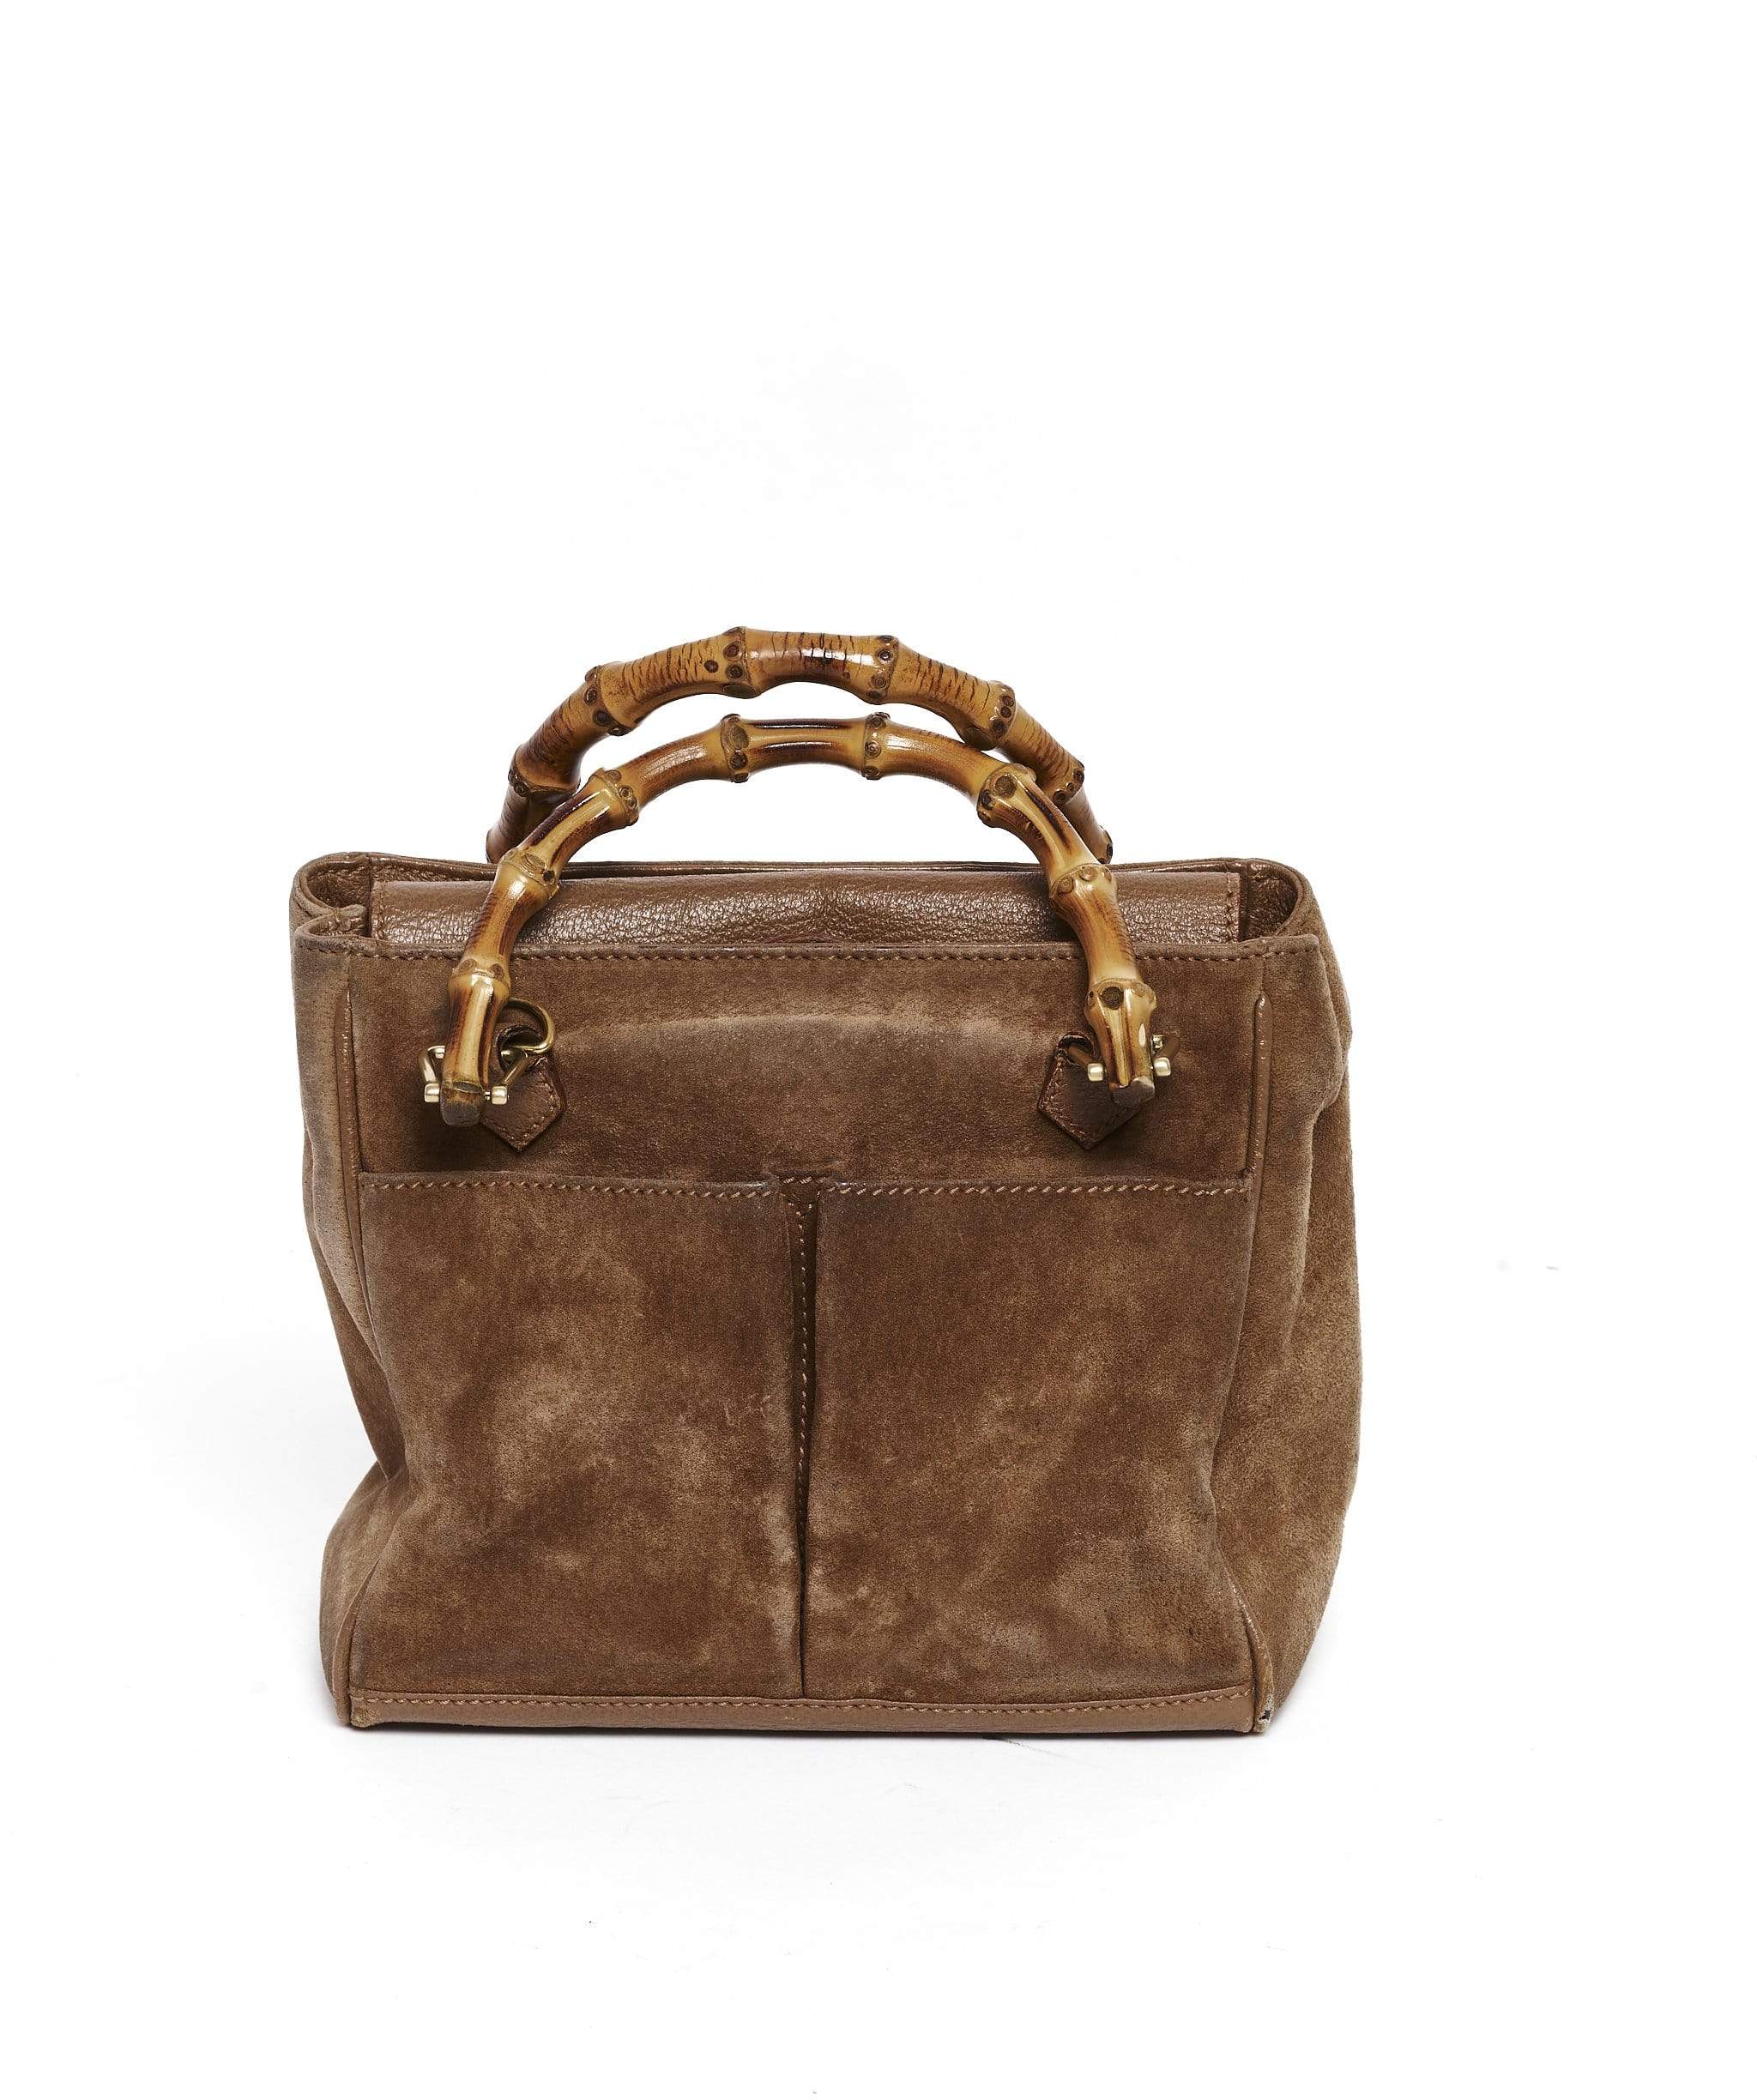 Gucci Gucci Brown Suede Bag with Bamboo Top Handle